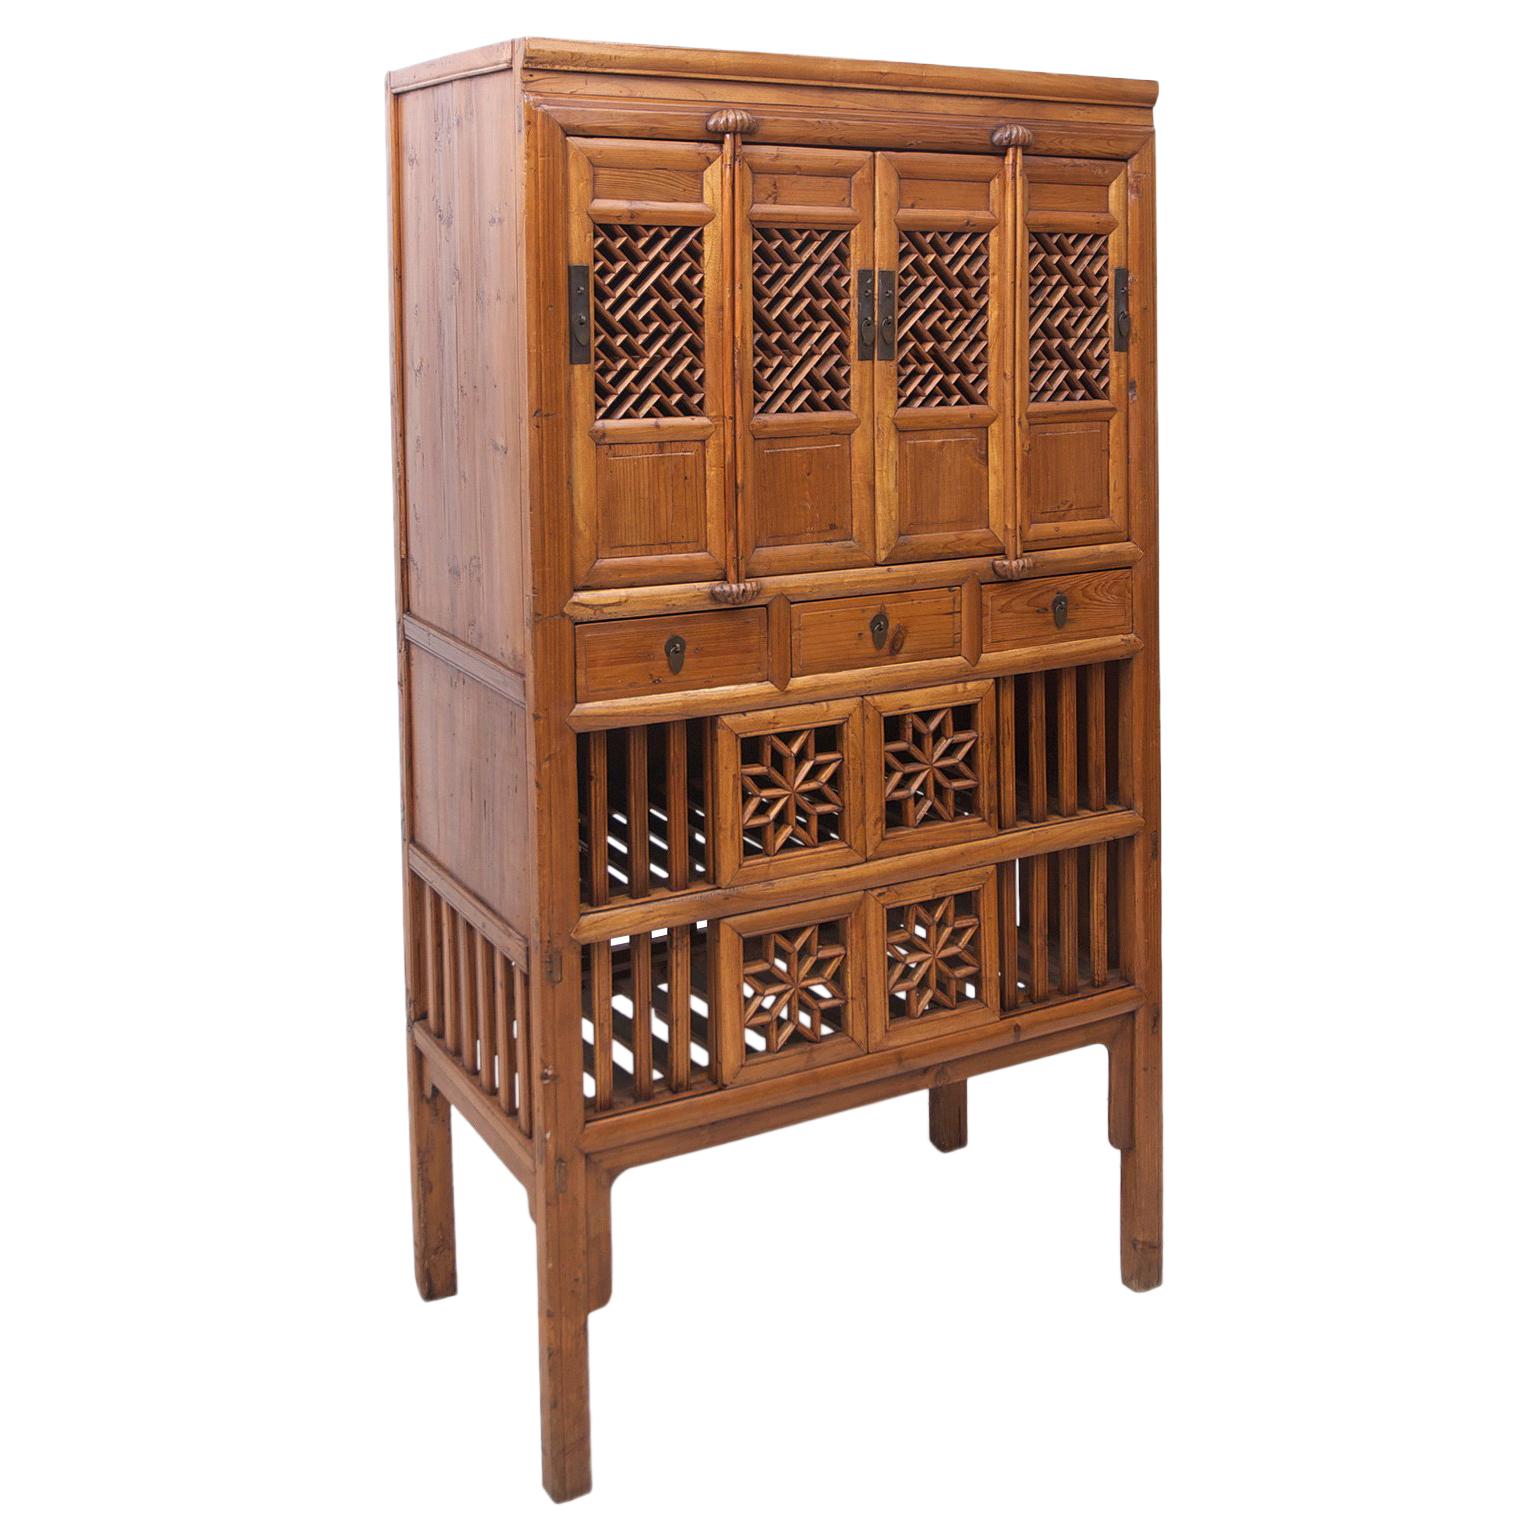 19th Century Chinese Food Cupboard in Elmwood, Qing Dynasty, circa Early 1800s